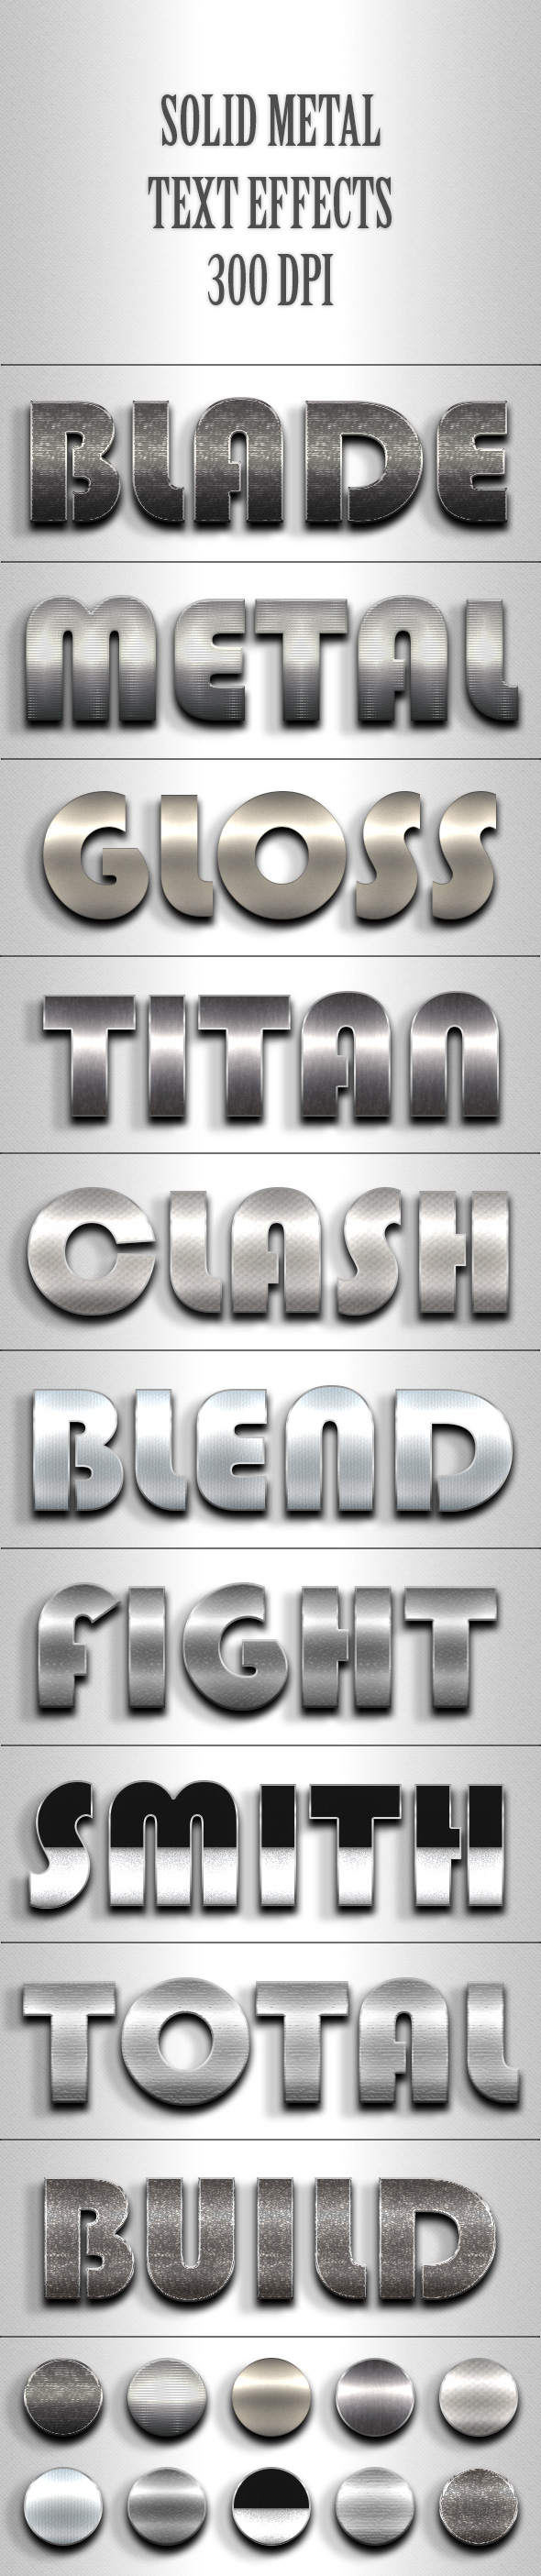 Solid Metal Text Effects